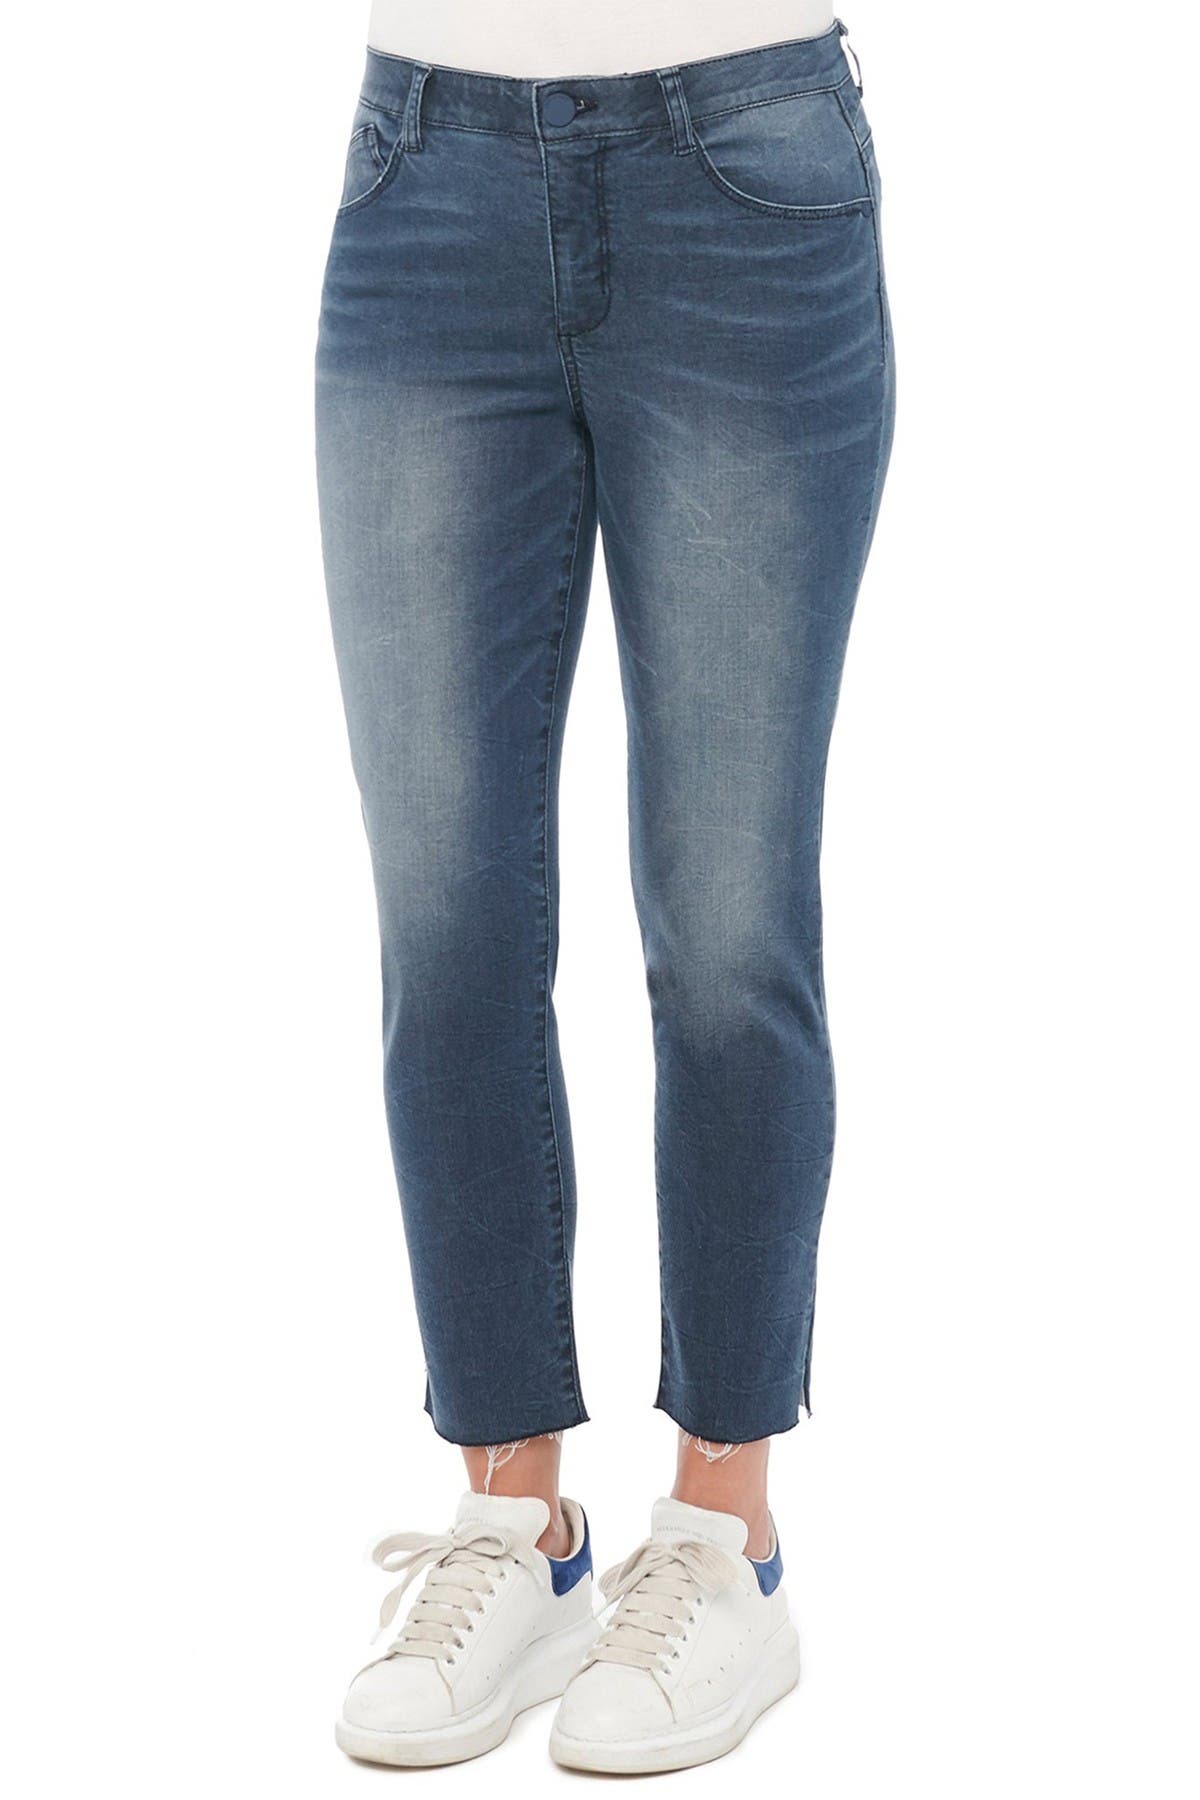 Democracy Ab Solution High Rise Vintage Style Jeans In Dark Blue4